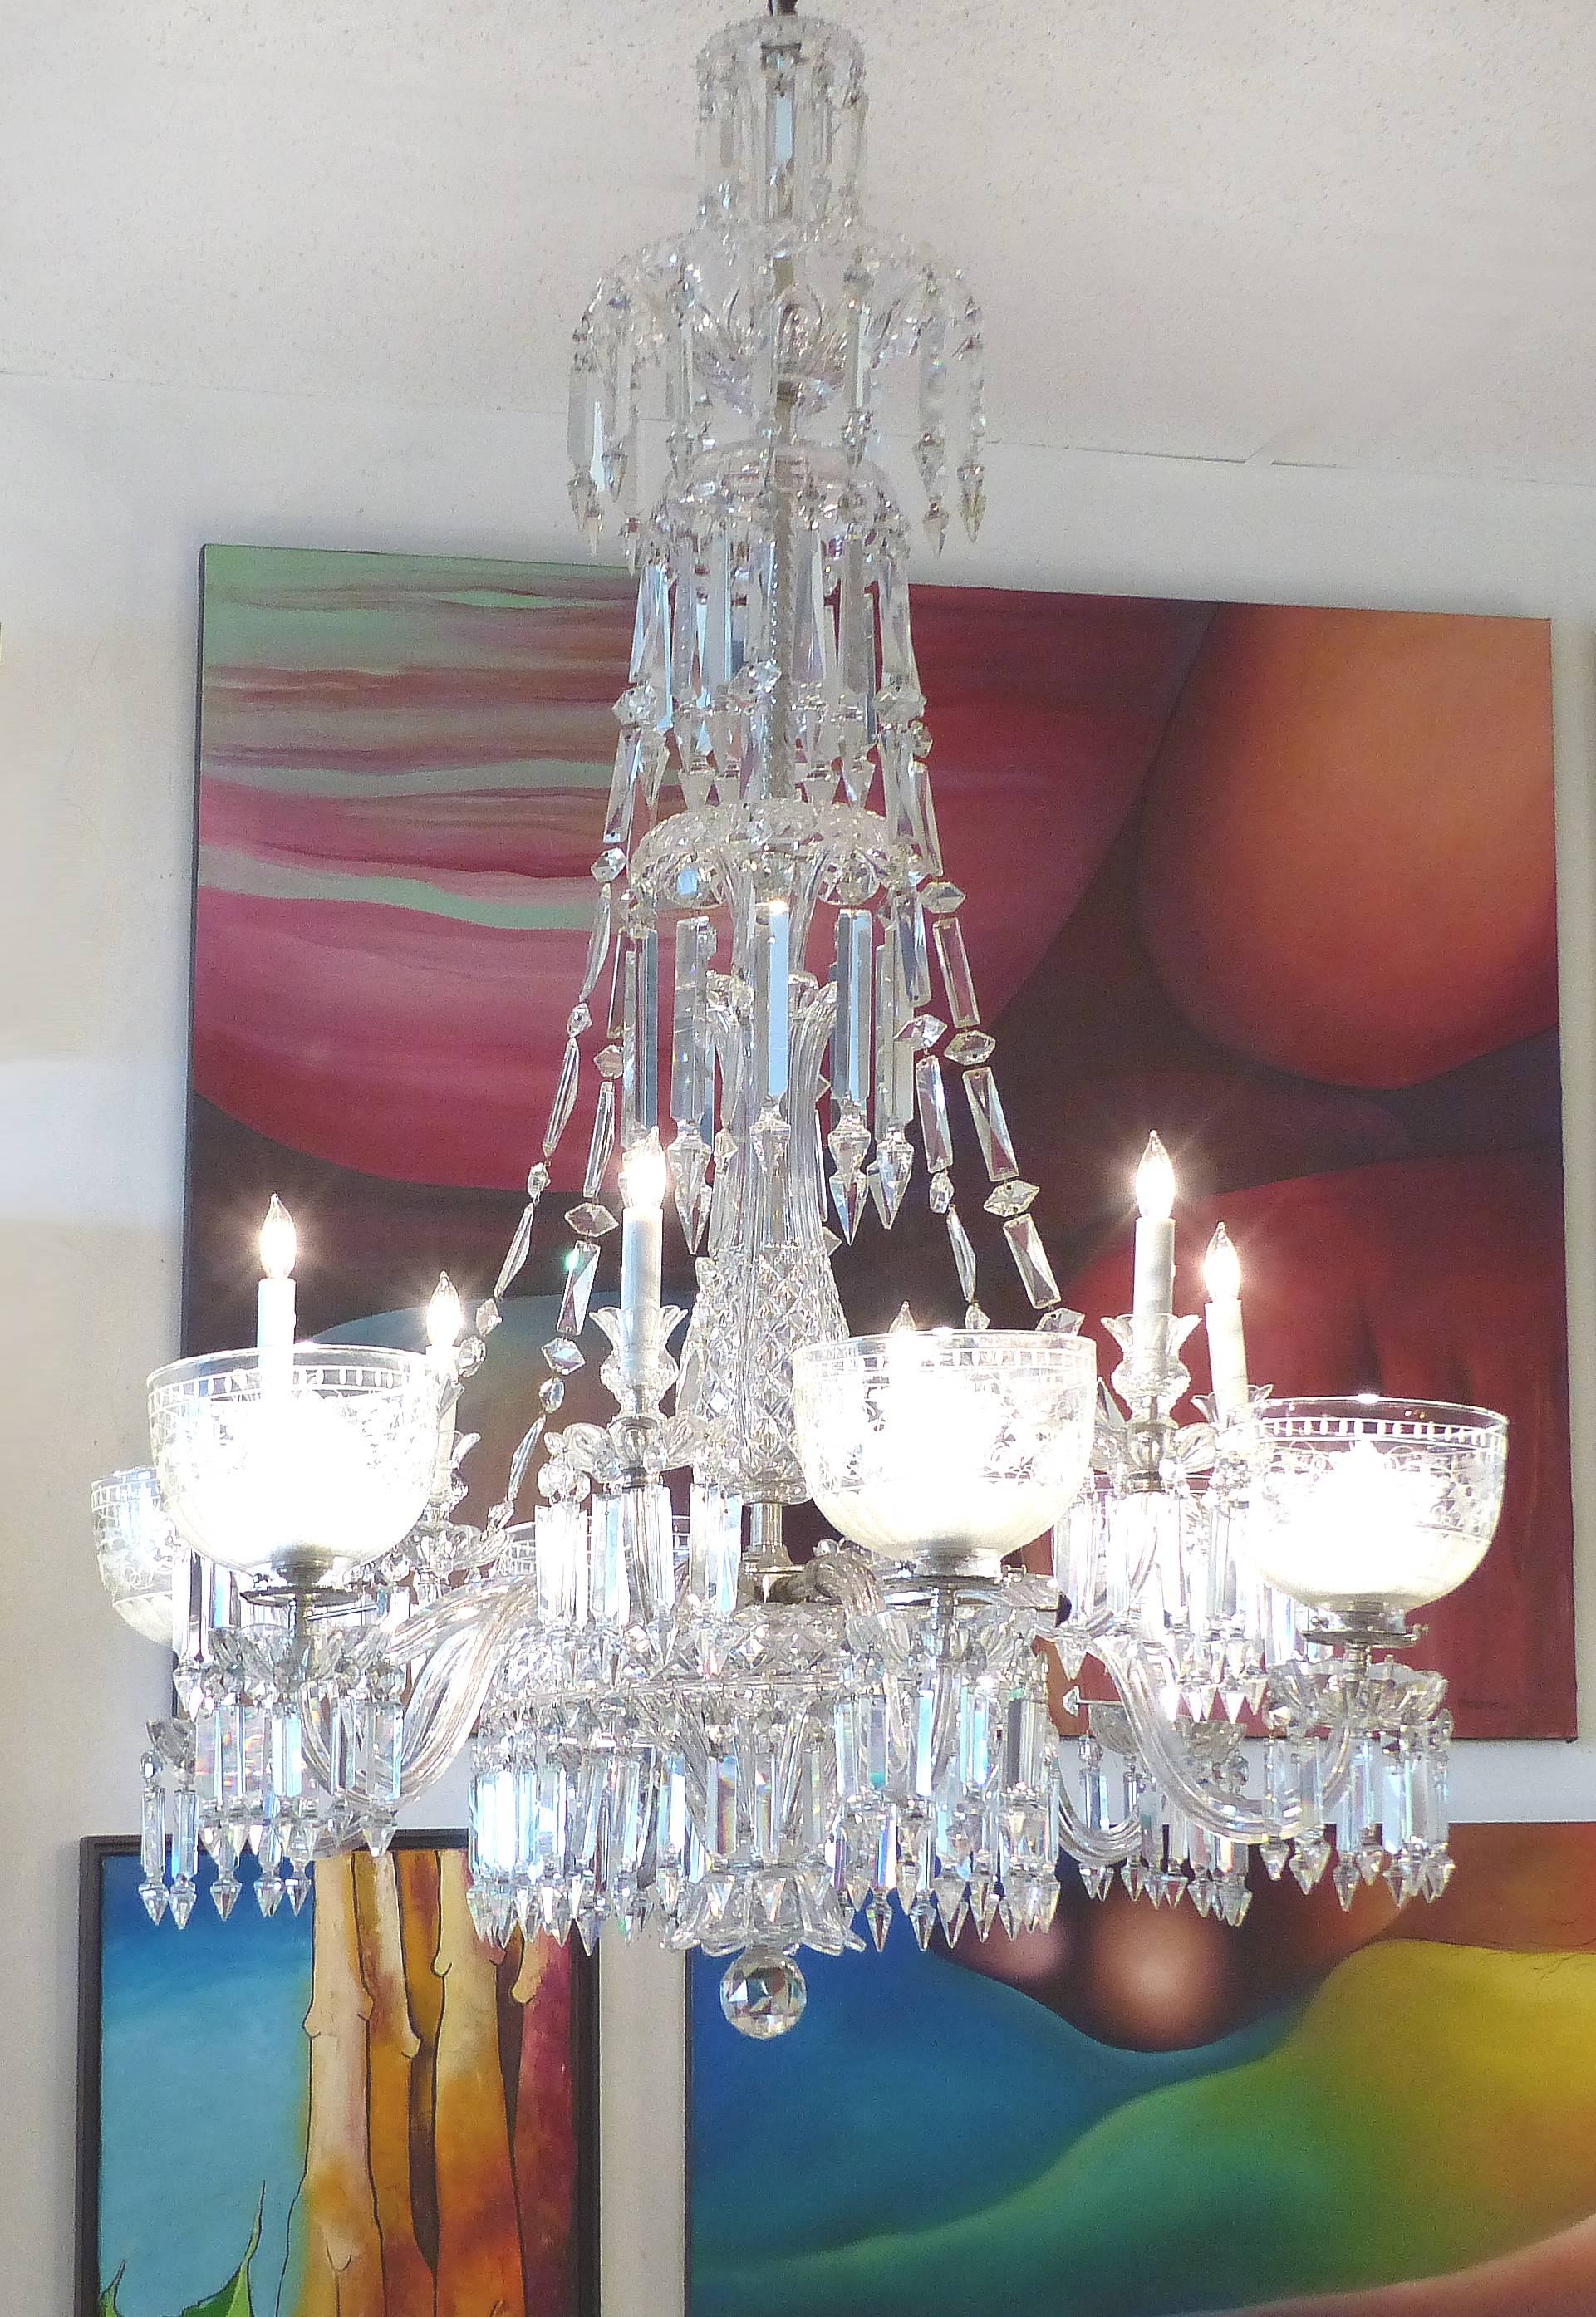 F. C. Osler English 19th Century Twelve-Arm Cut Crystal Gas Chandelier by 

Offered for sale is a fine English cut crystal twelve arm chandelier by the renowned firm F. C. Osler. Originally a gas chandelier with later electrification, this chadelier